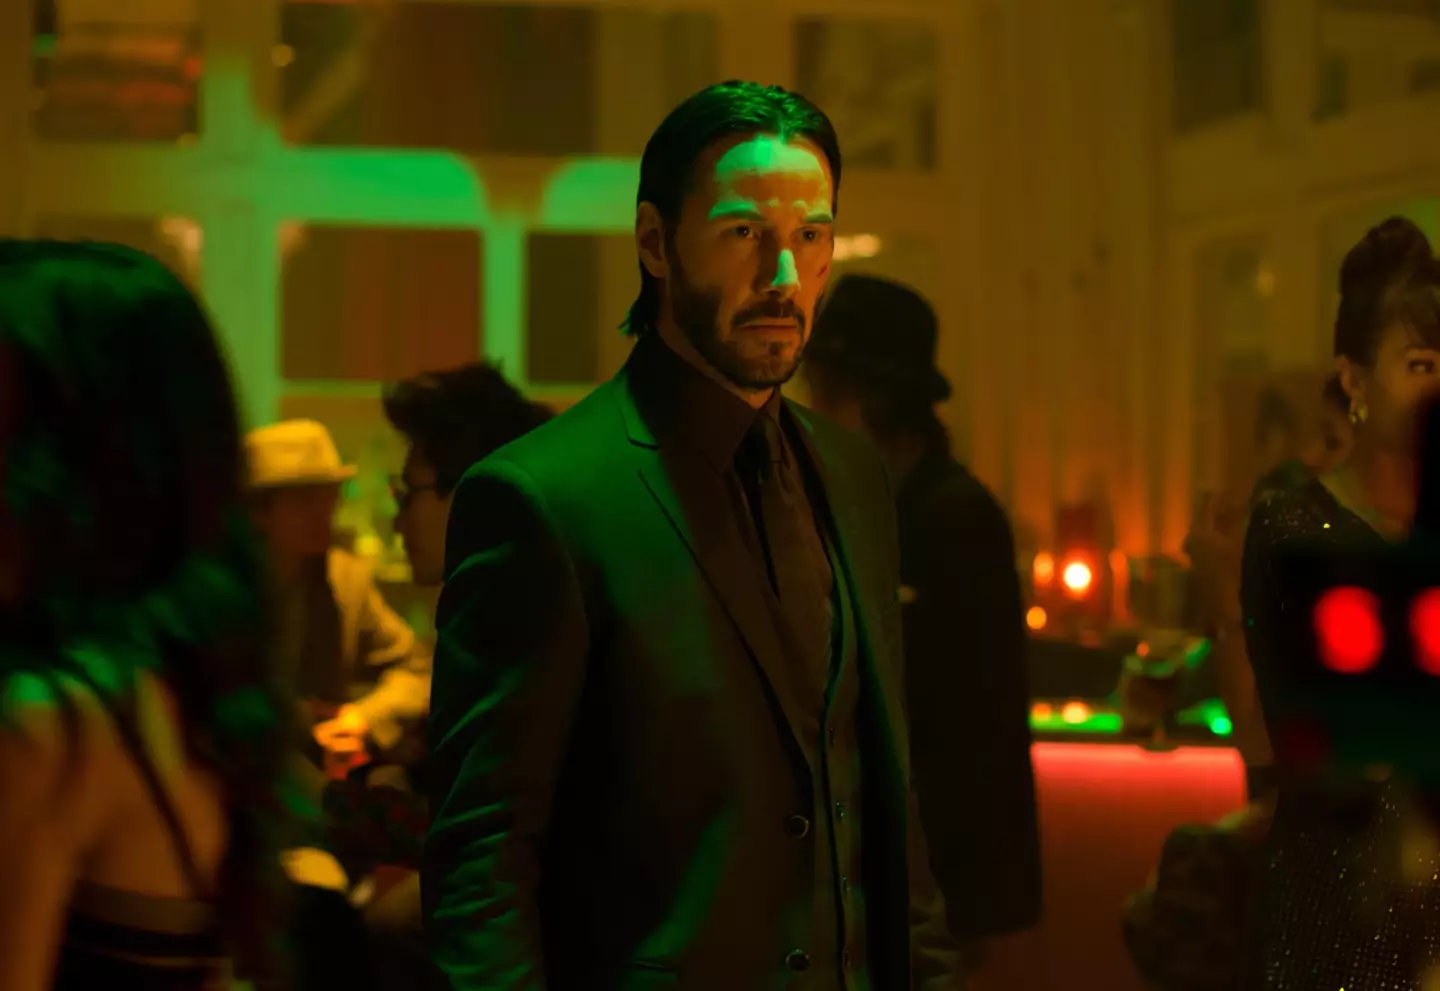 Actor Keanu Reeves pleaded to have his character John Wick definitely killed off by the end of the fourth film.